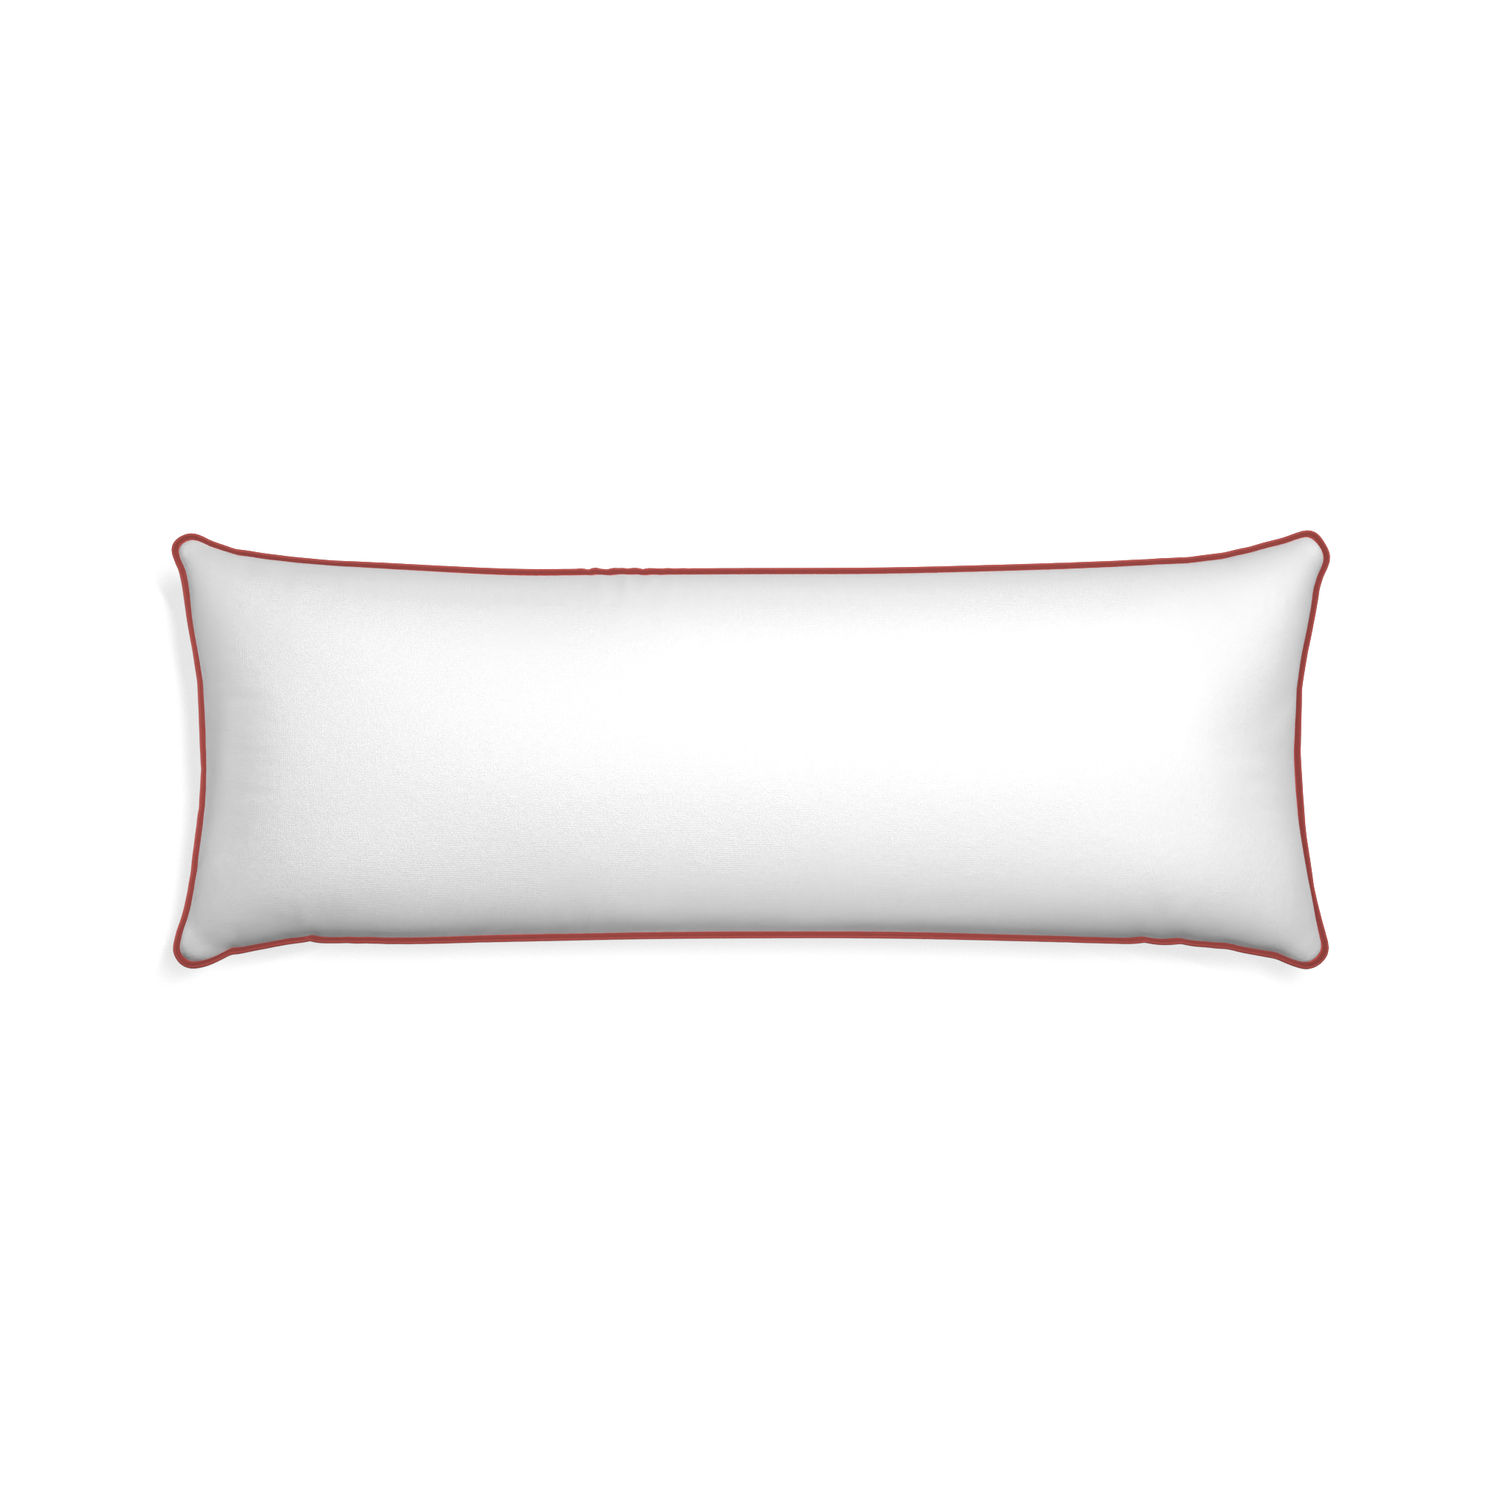 Xl-lumbar snow custom white cottonpillow with c piping on white background